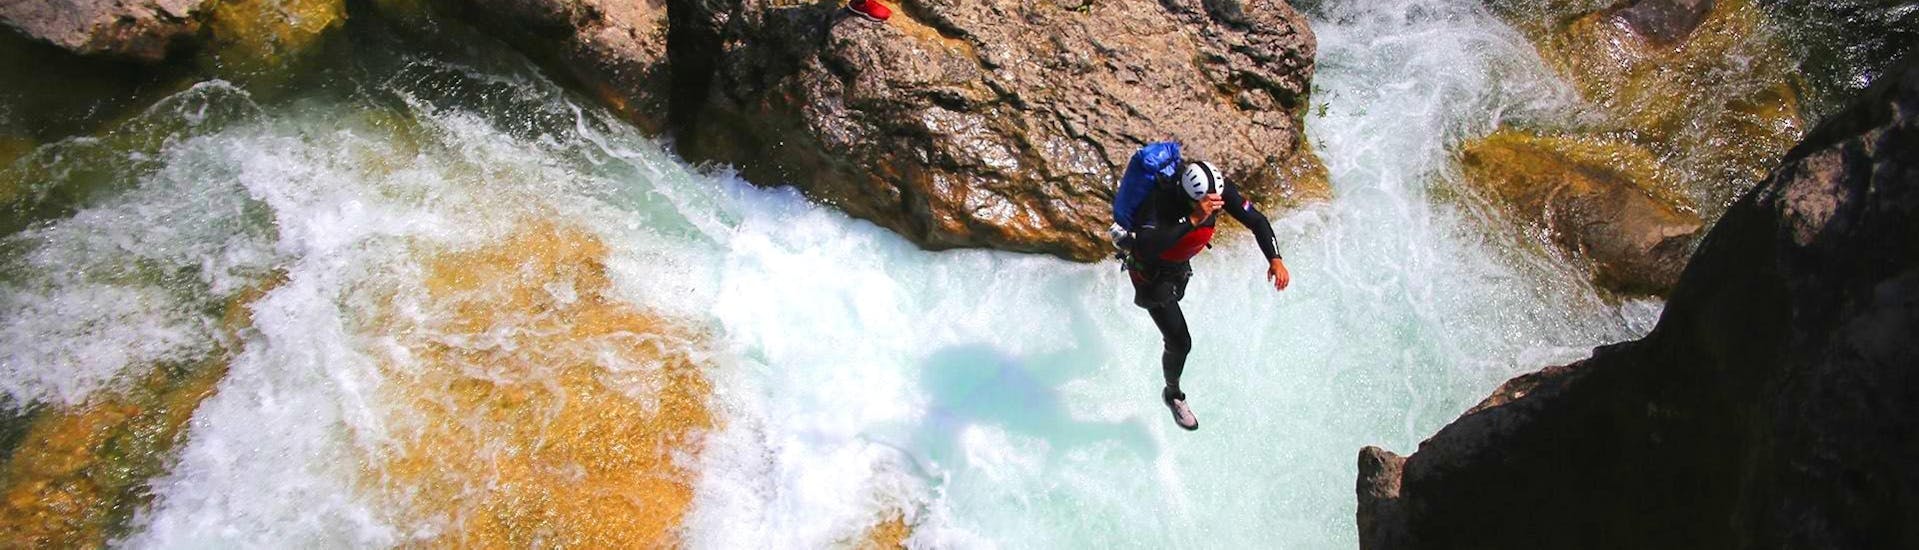 A canyoning guide from Adventure Dalmatia is jumping into the water during the Canyoning for Beginners with City-Transfer from Split at Cetina River.